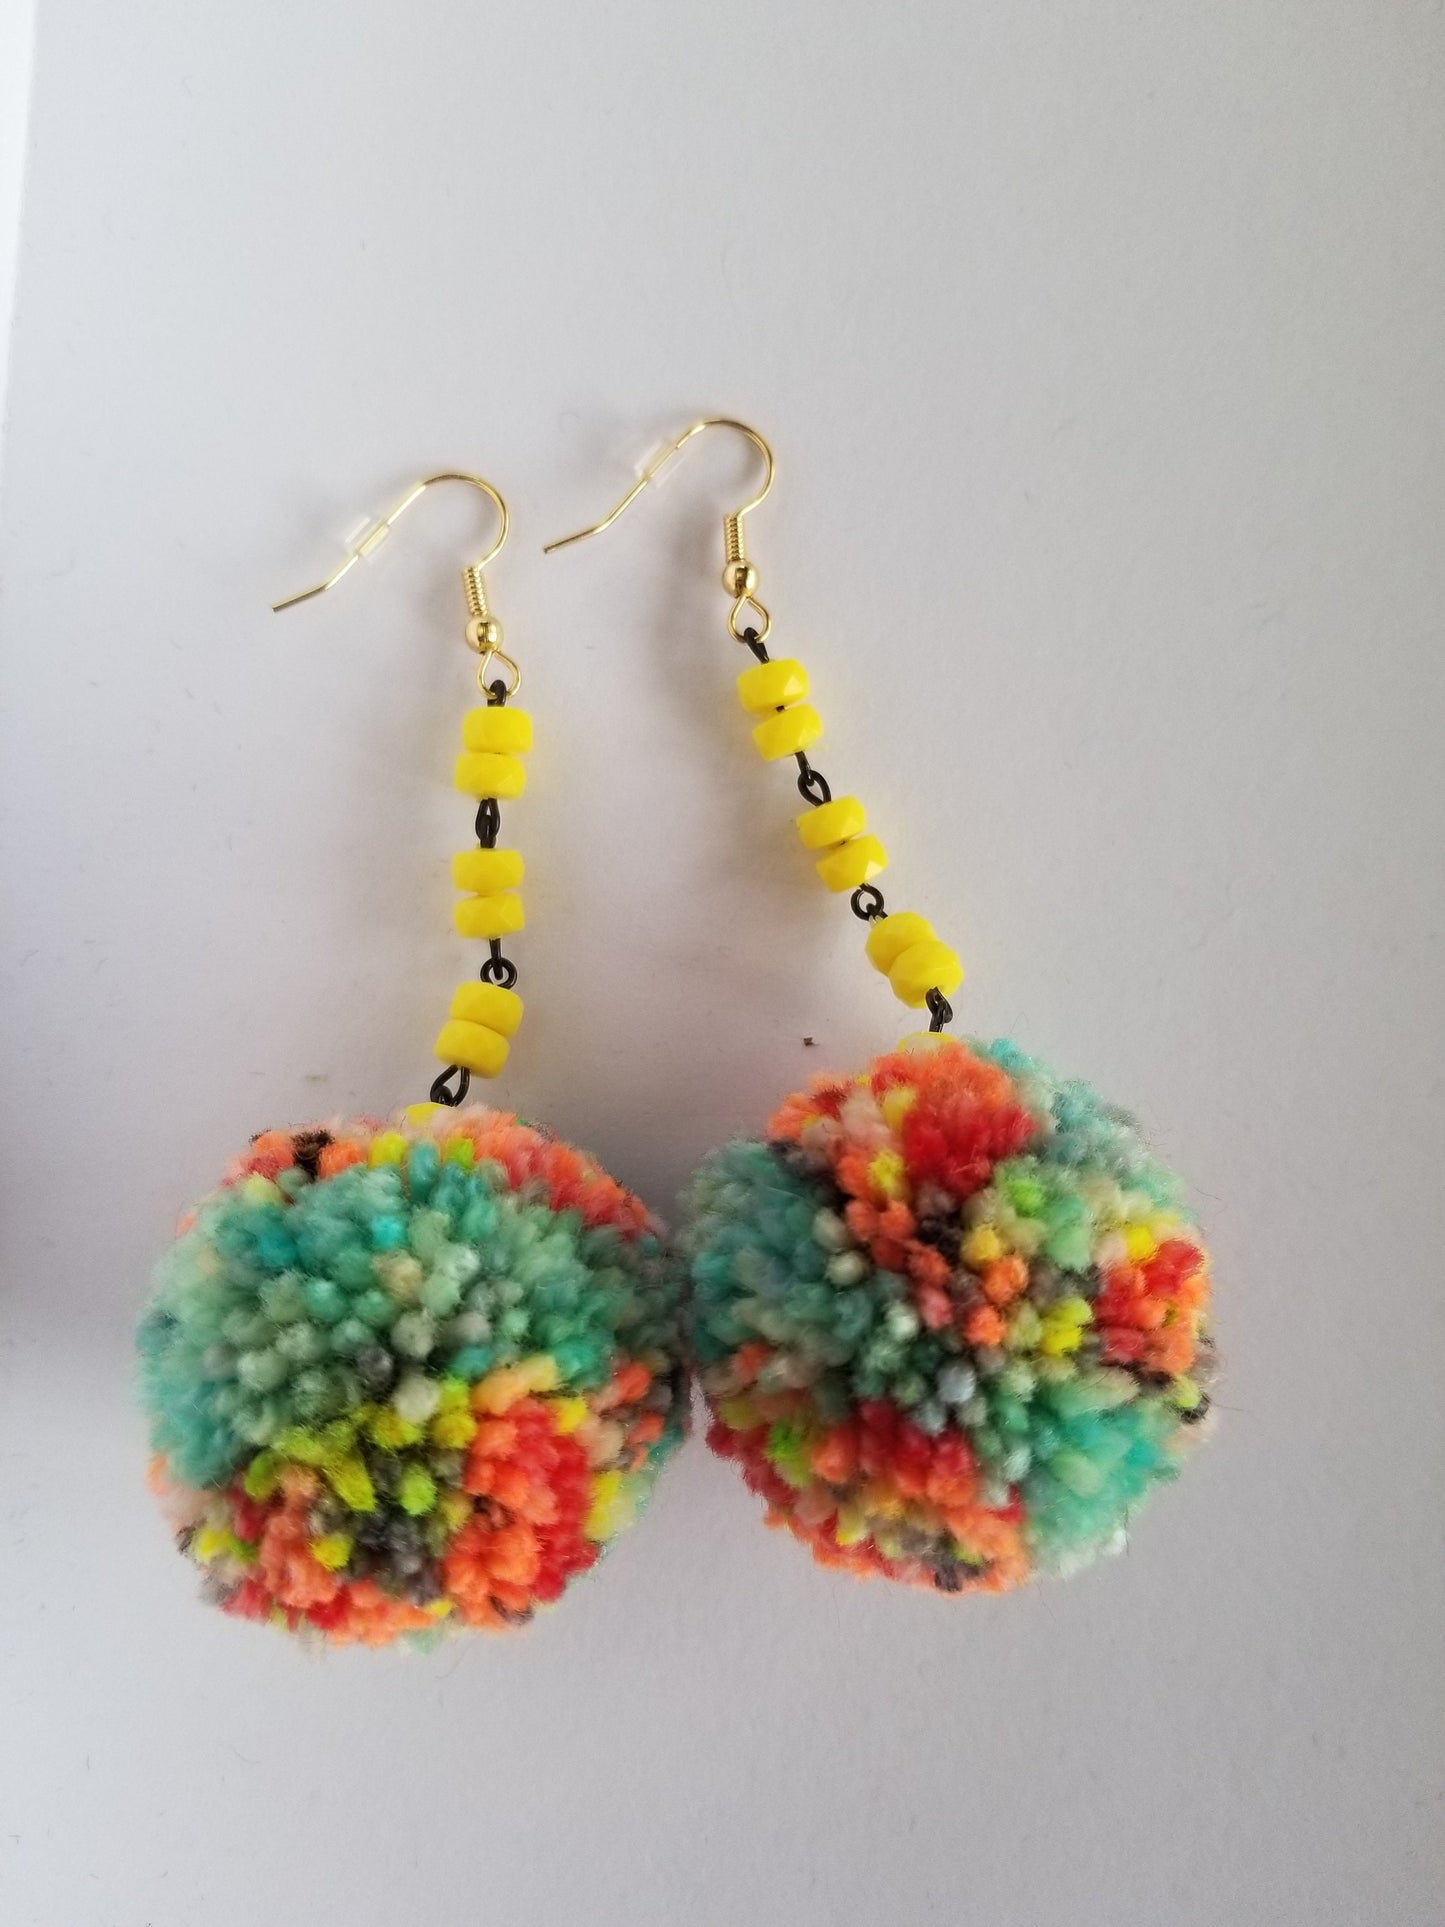 Pom Pom Earrings with Yellow Beads